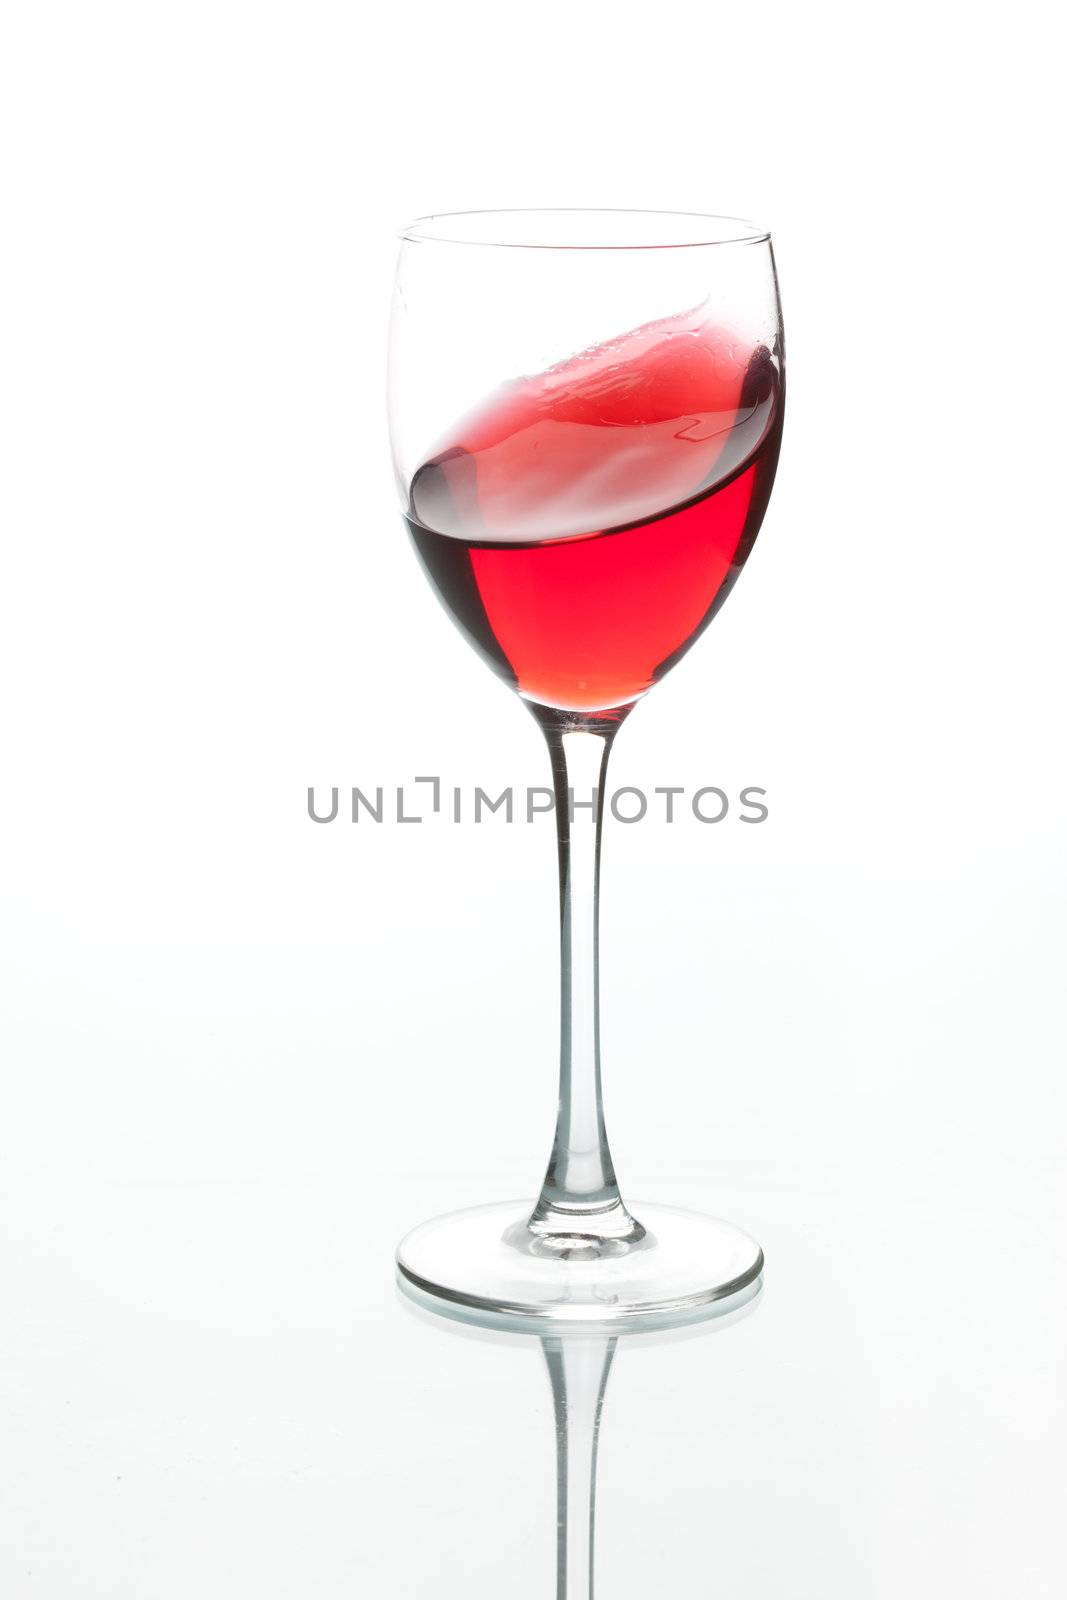 food series: glass of tasty red wine